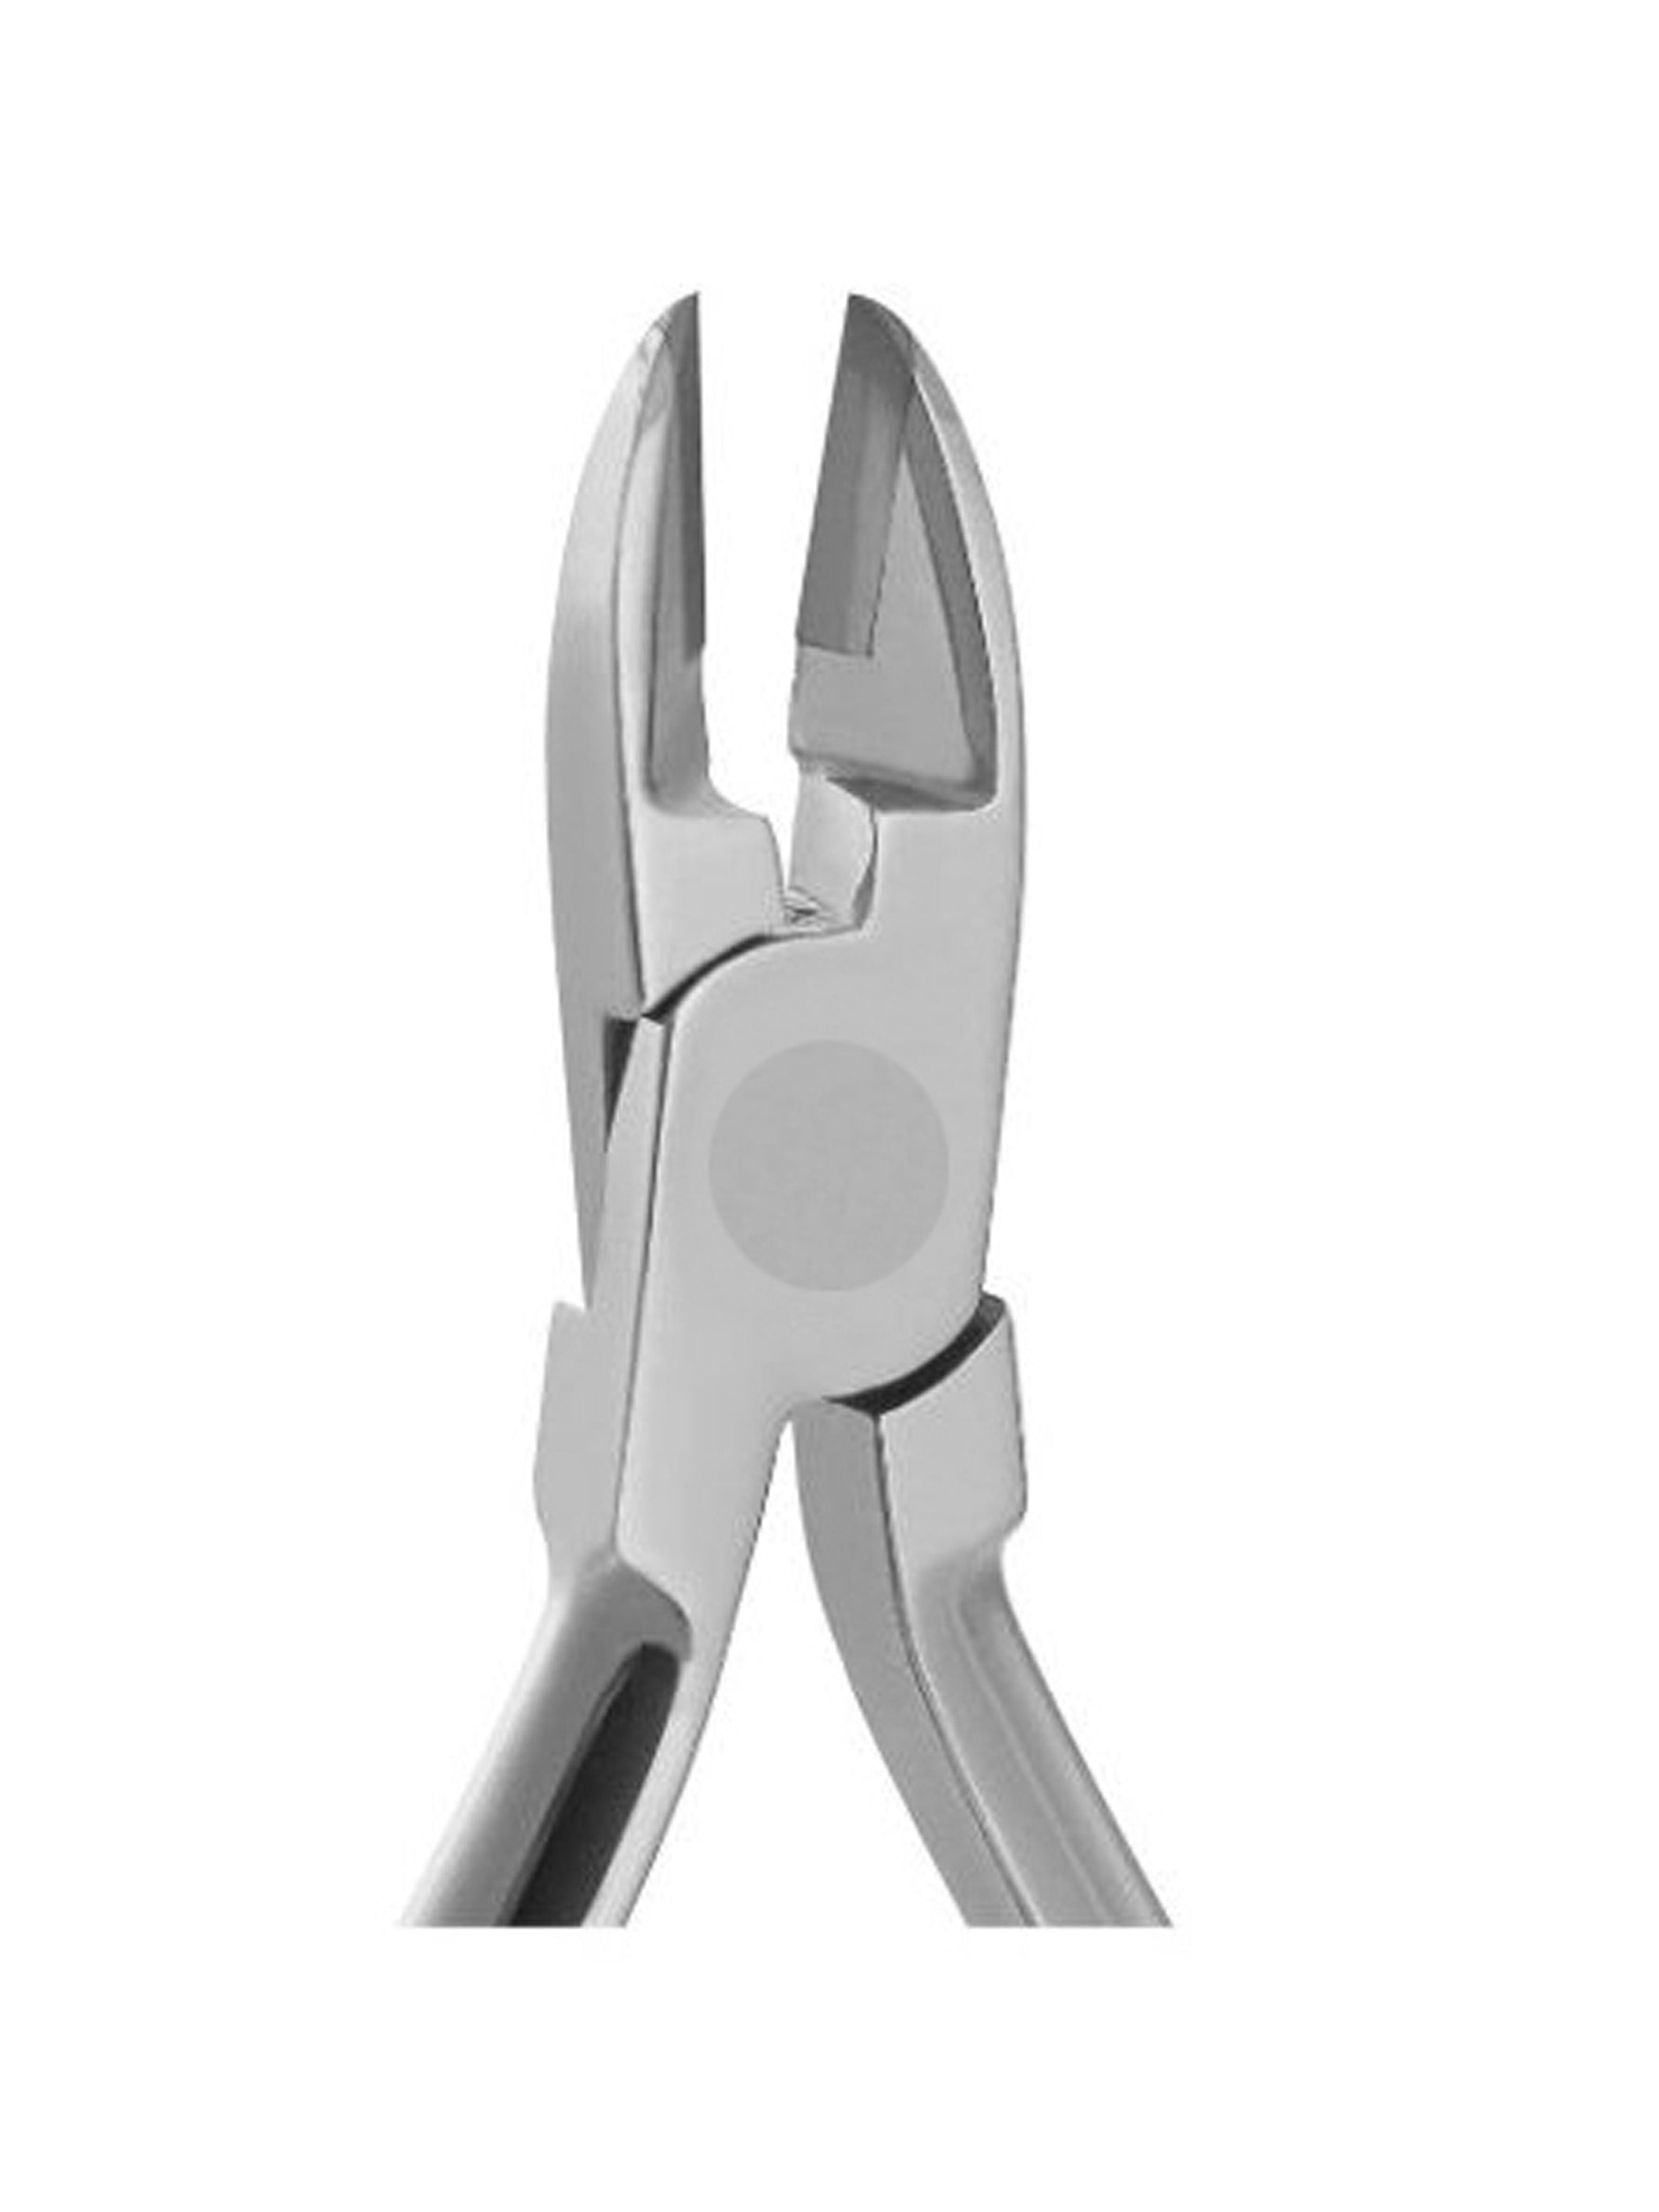 Orthodontic Pliers wire And Ligature Cutters